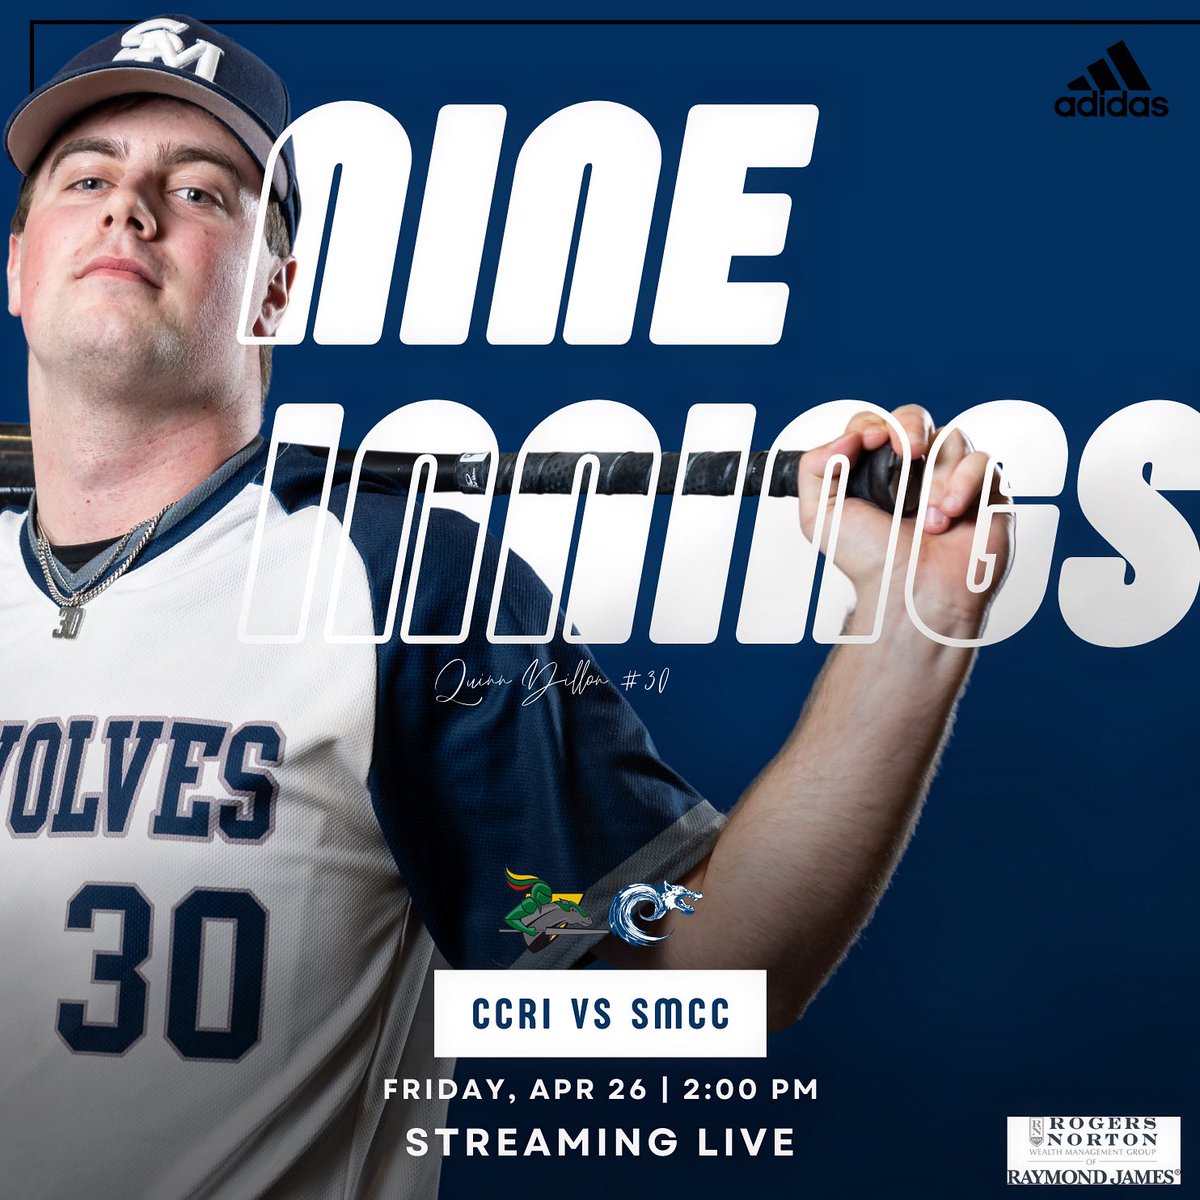 🏠 NINE INNINGS
➡️ @seawolvesbase 
.
🆚 @CCRIAthletics 
✅ @NJCAA 
📍 South Portland
⏰ 2:00 pm
📊 gosmccseawolves.com/sports/bsb/202…
📺 ysccsportsnetwork.com/southernmainec…

#WeAreSMCC #GoSeawolves @YSCC8 @USCAA @smccmaine @MaineSportsComm @MCCSme